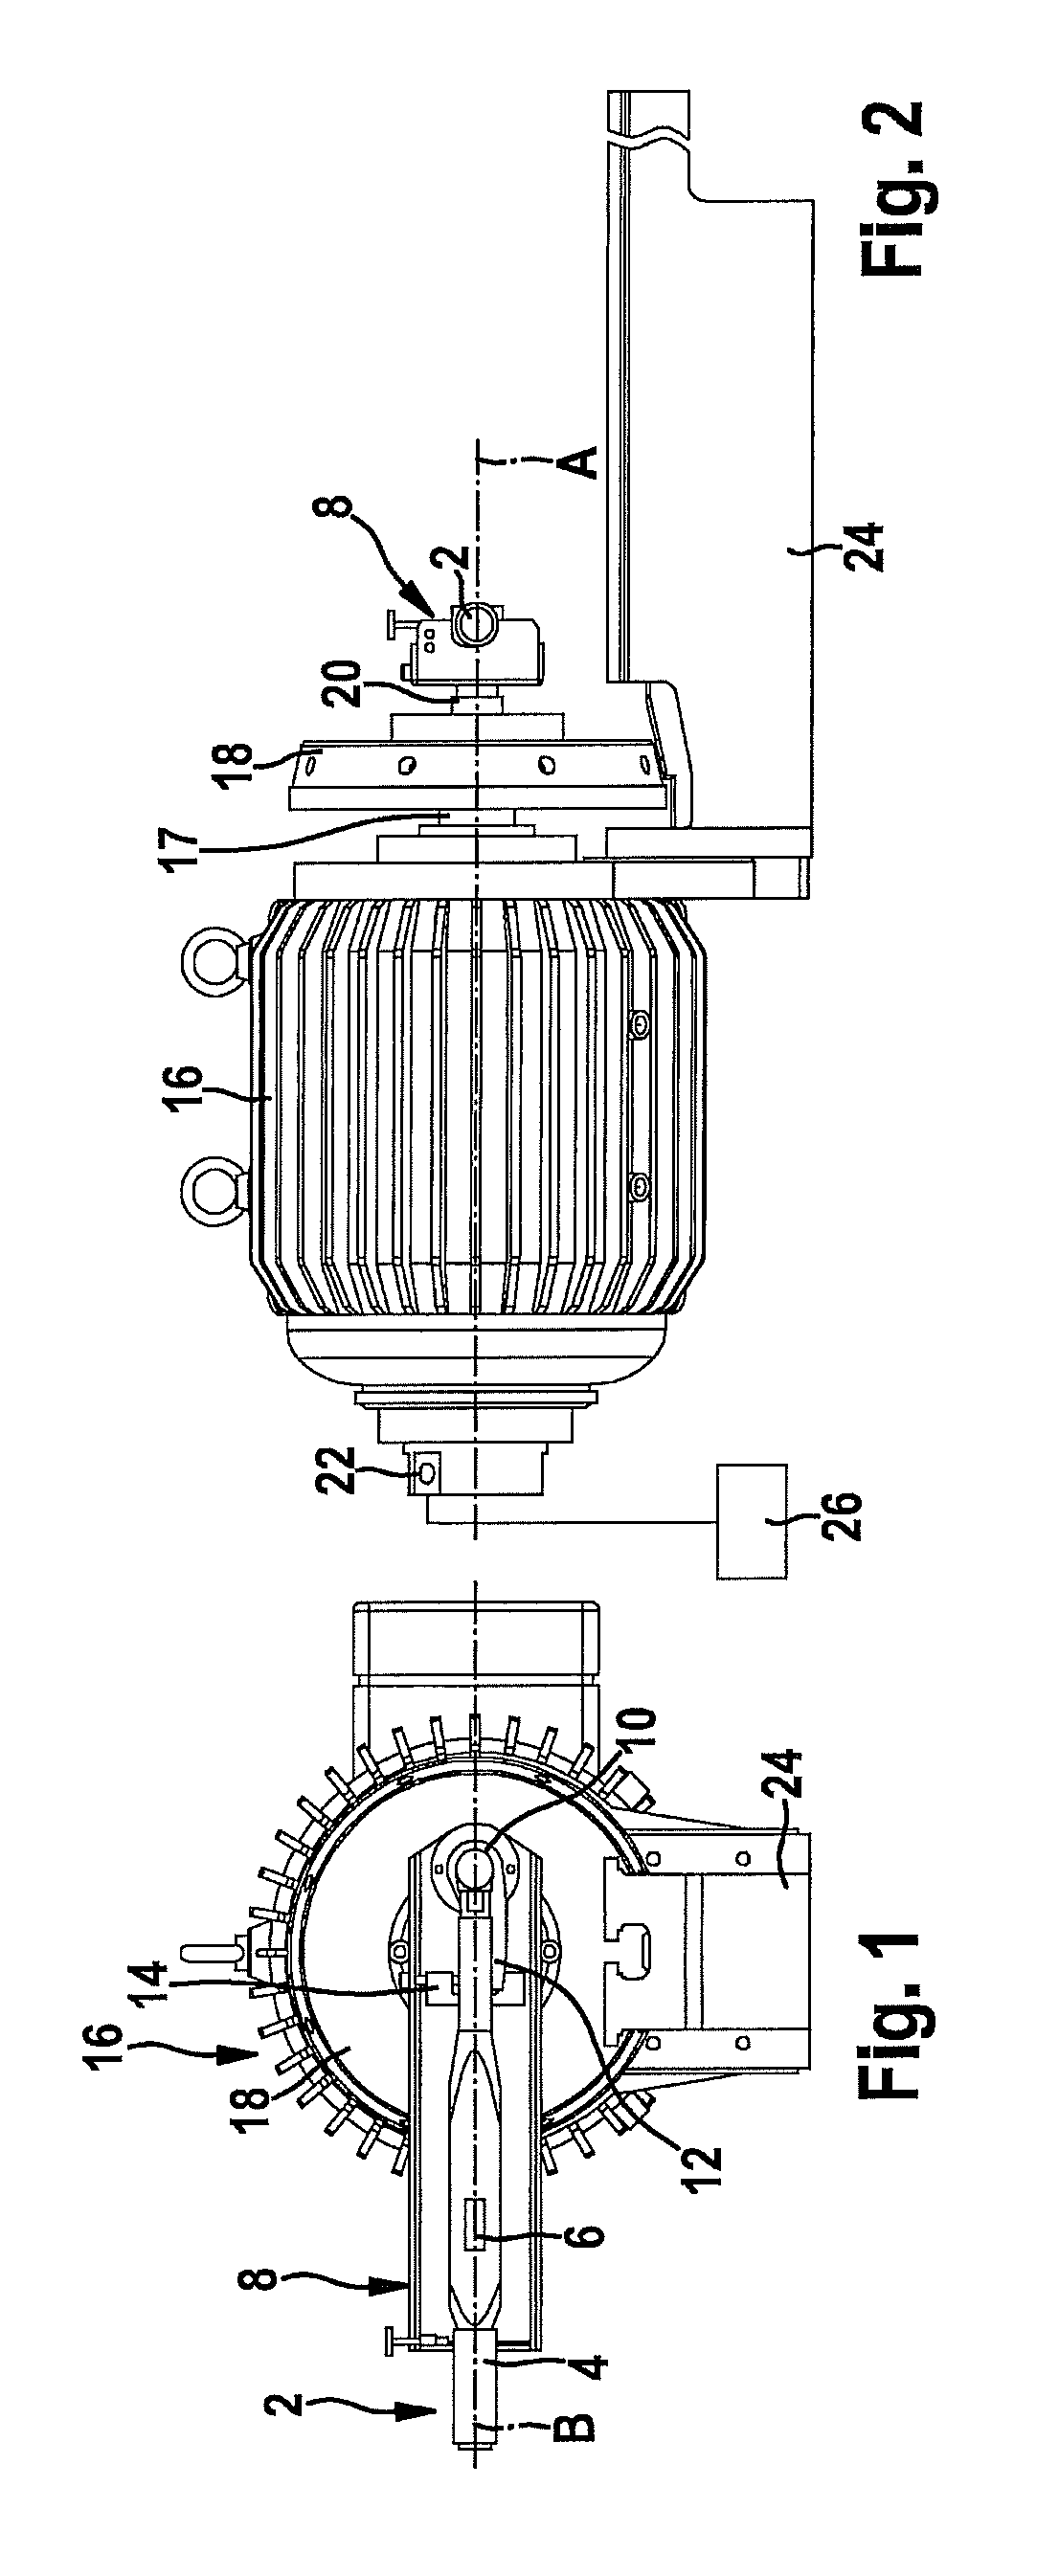 Device and method for checking an assembly wrench